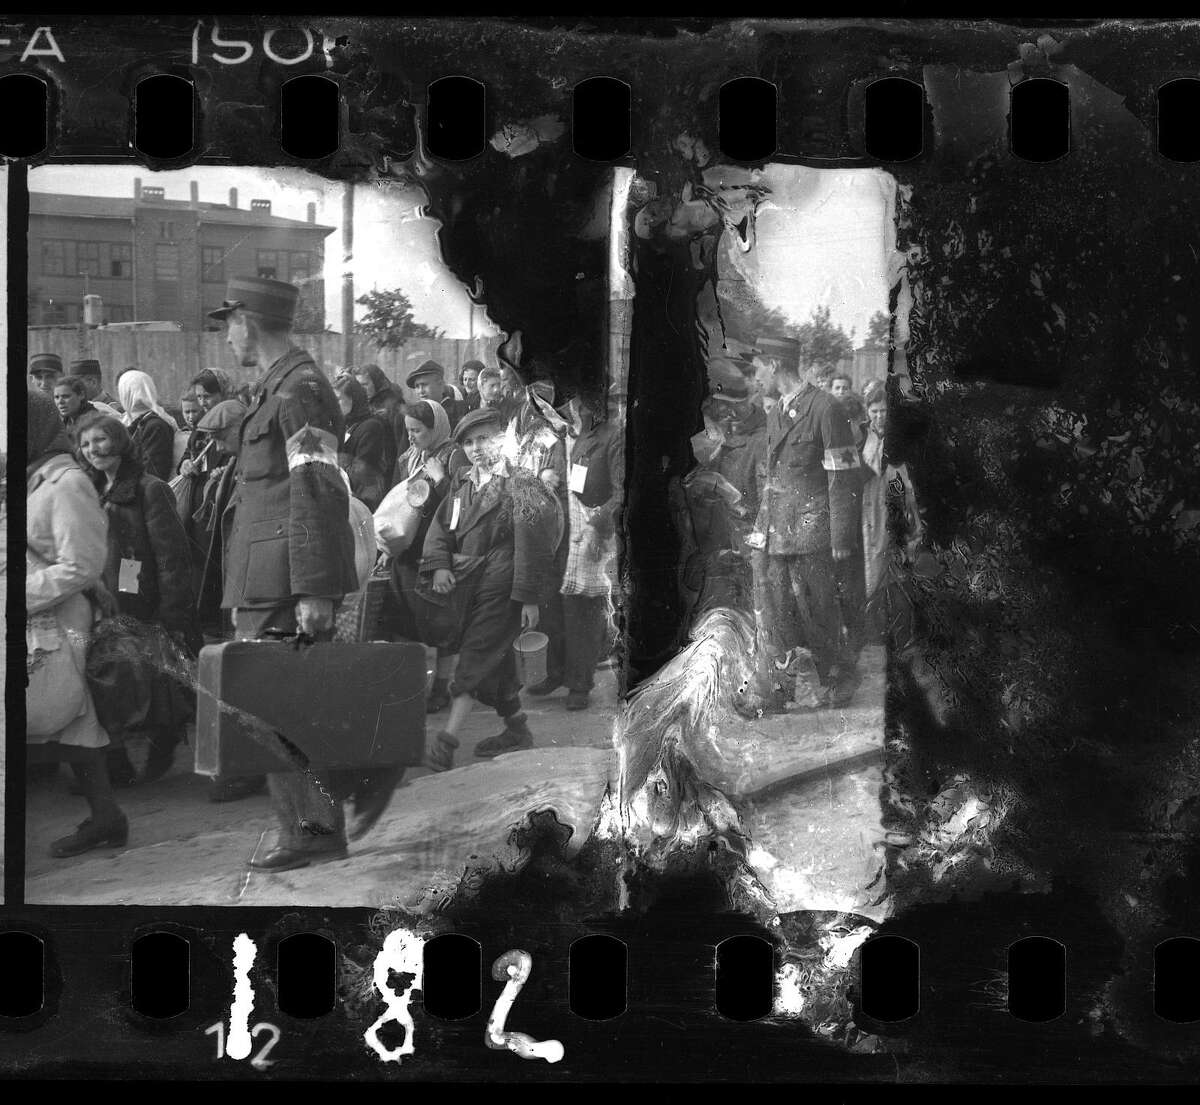 Some of Holocaust survivor and photographer Henryk Ross film negatives were destroyed by the elements. He's part of an exhibit during this year's “Holocaust: Learn and Remember” series.